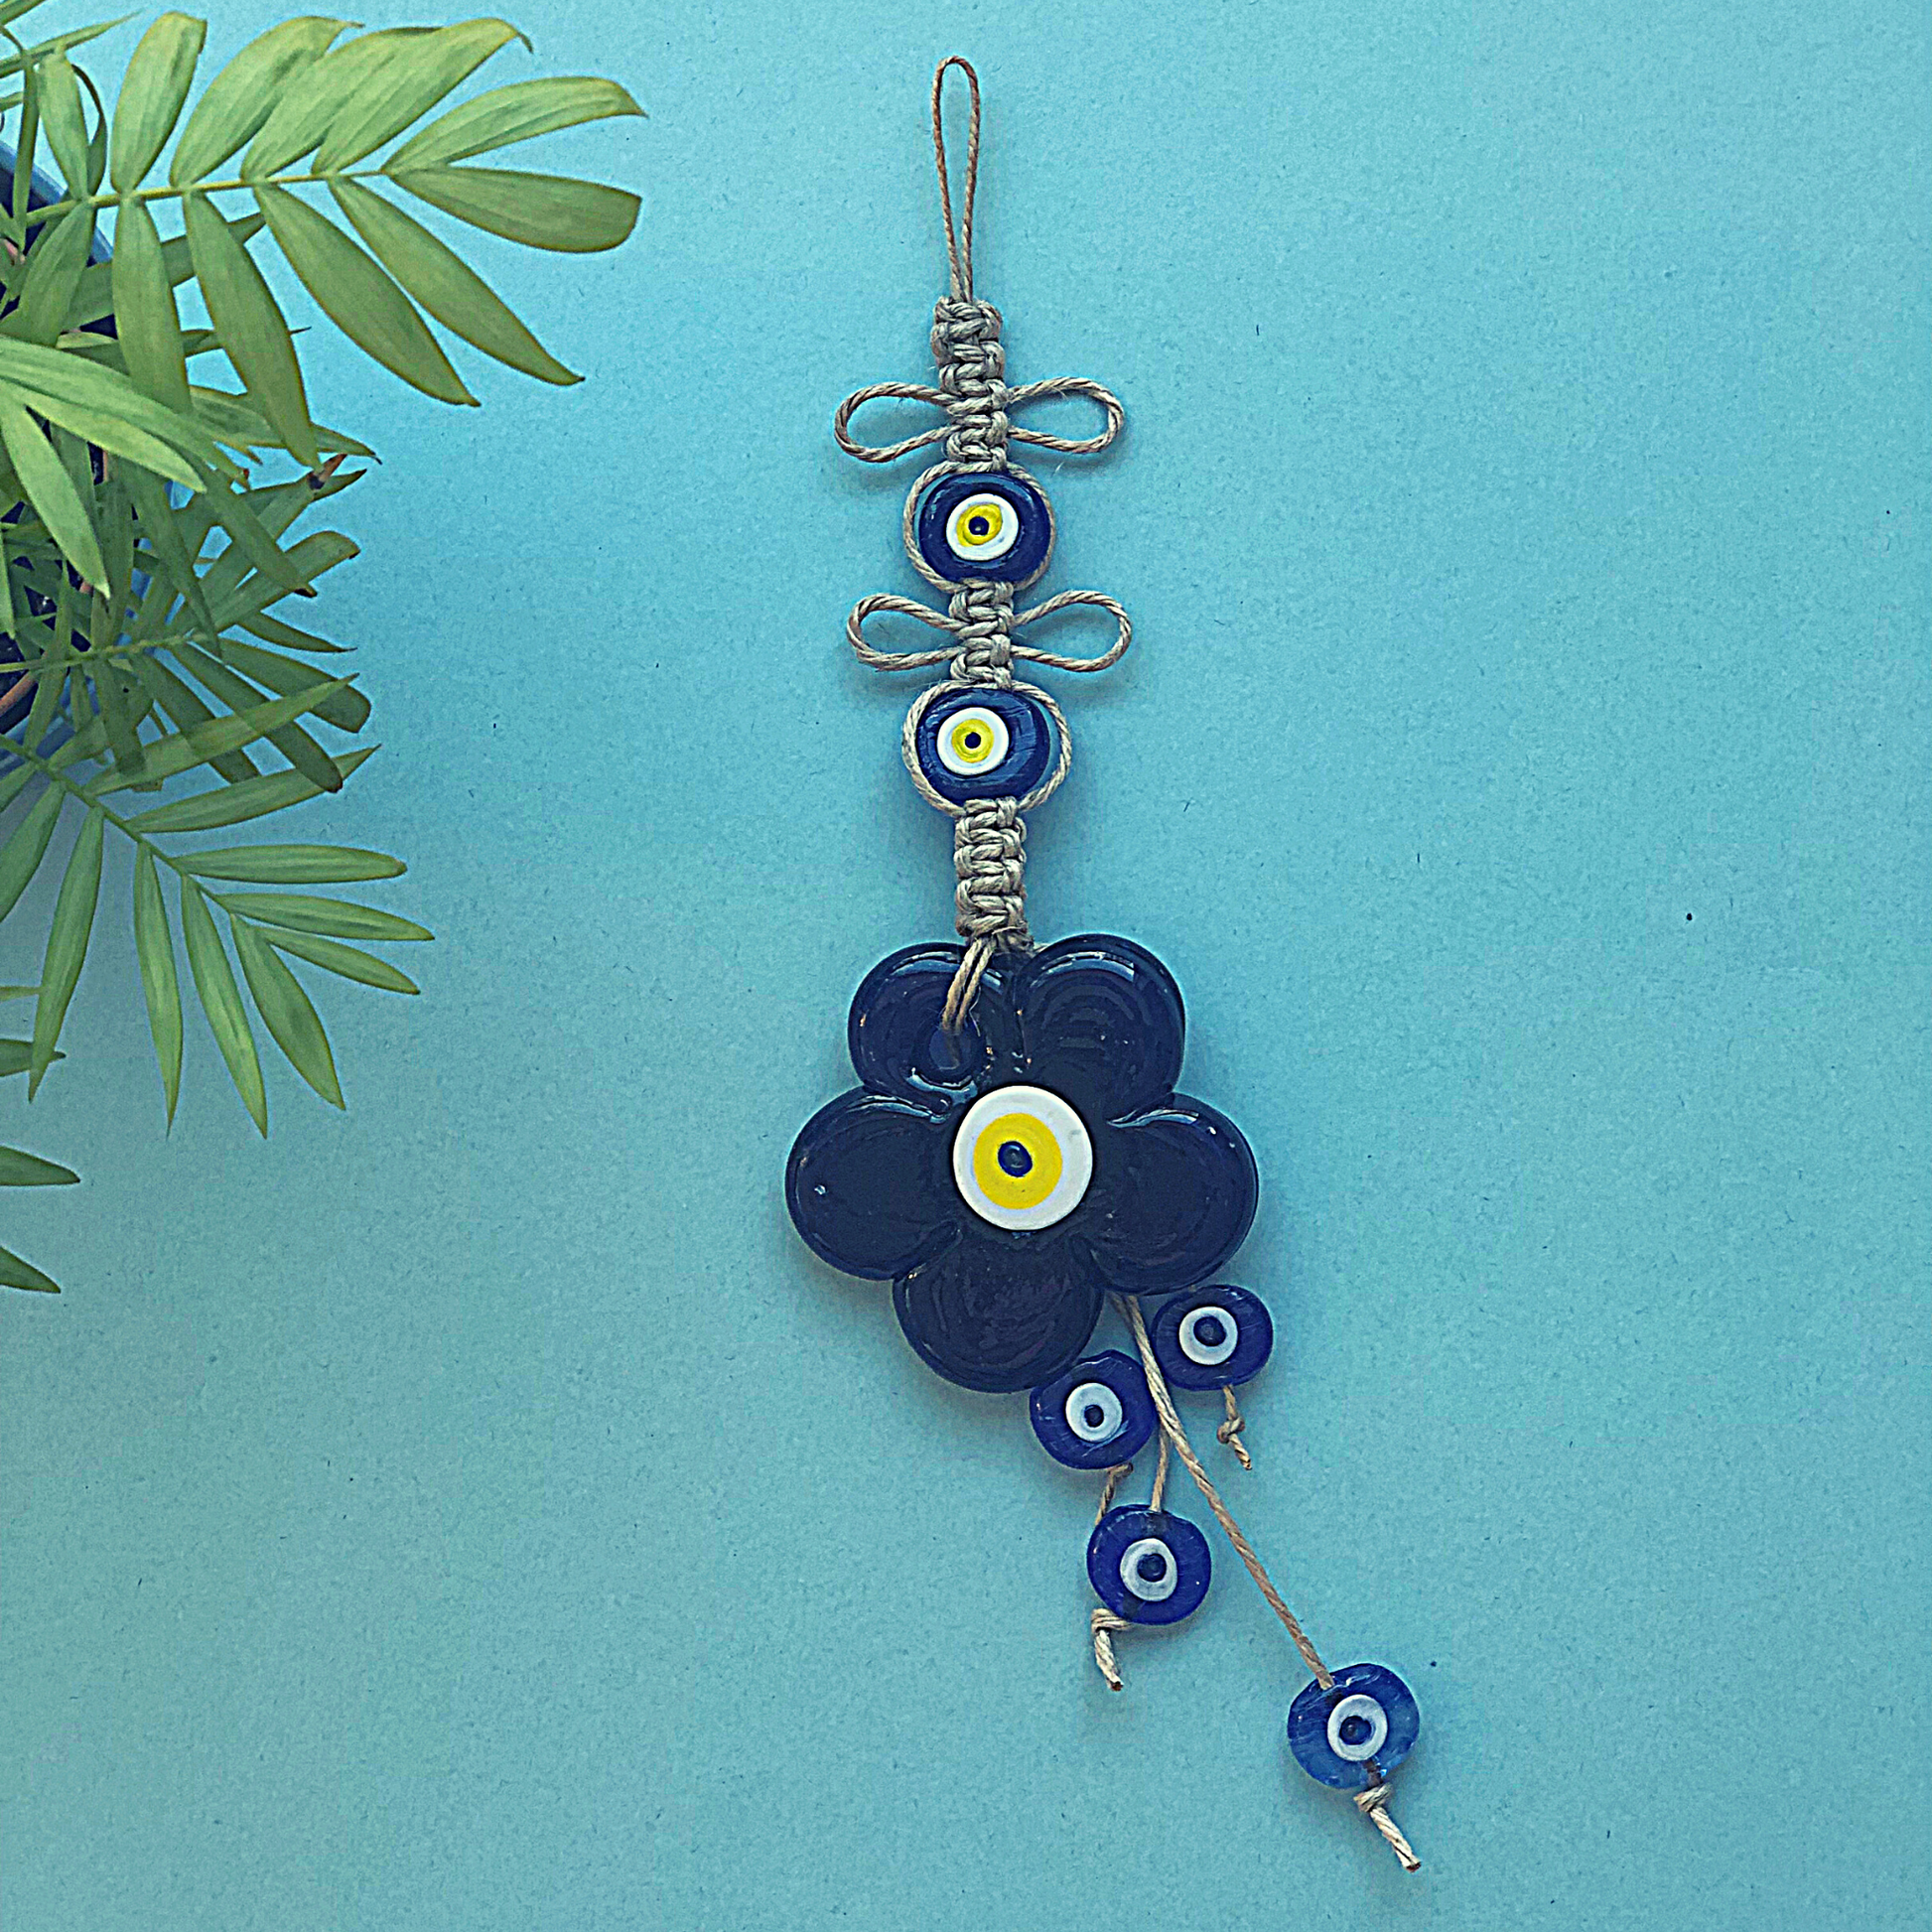 Evil eye macrame wall hanging with large glass evil eye disc and smaller nazar beads 